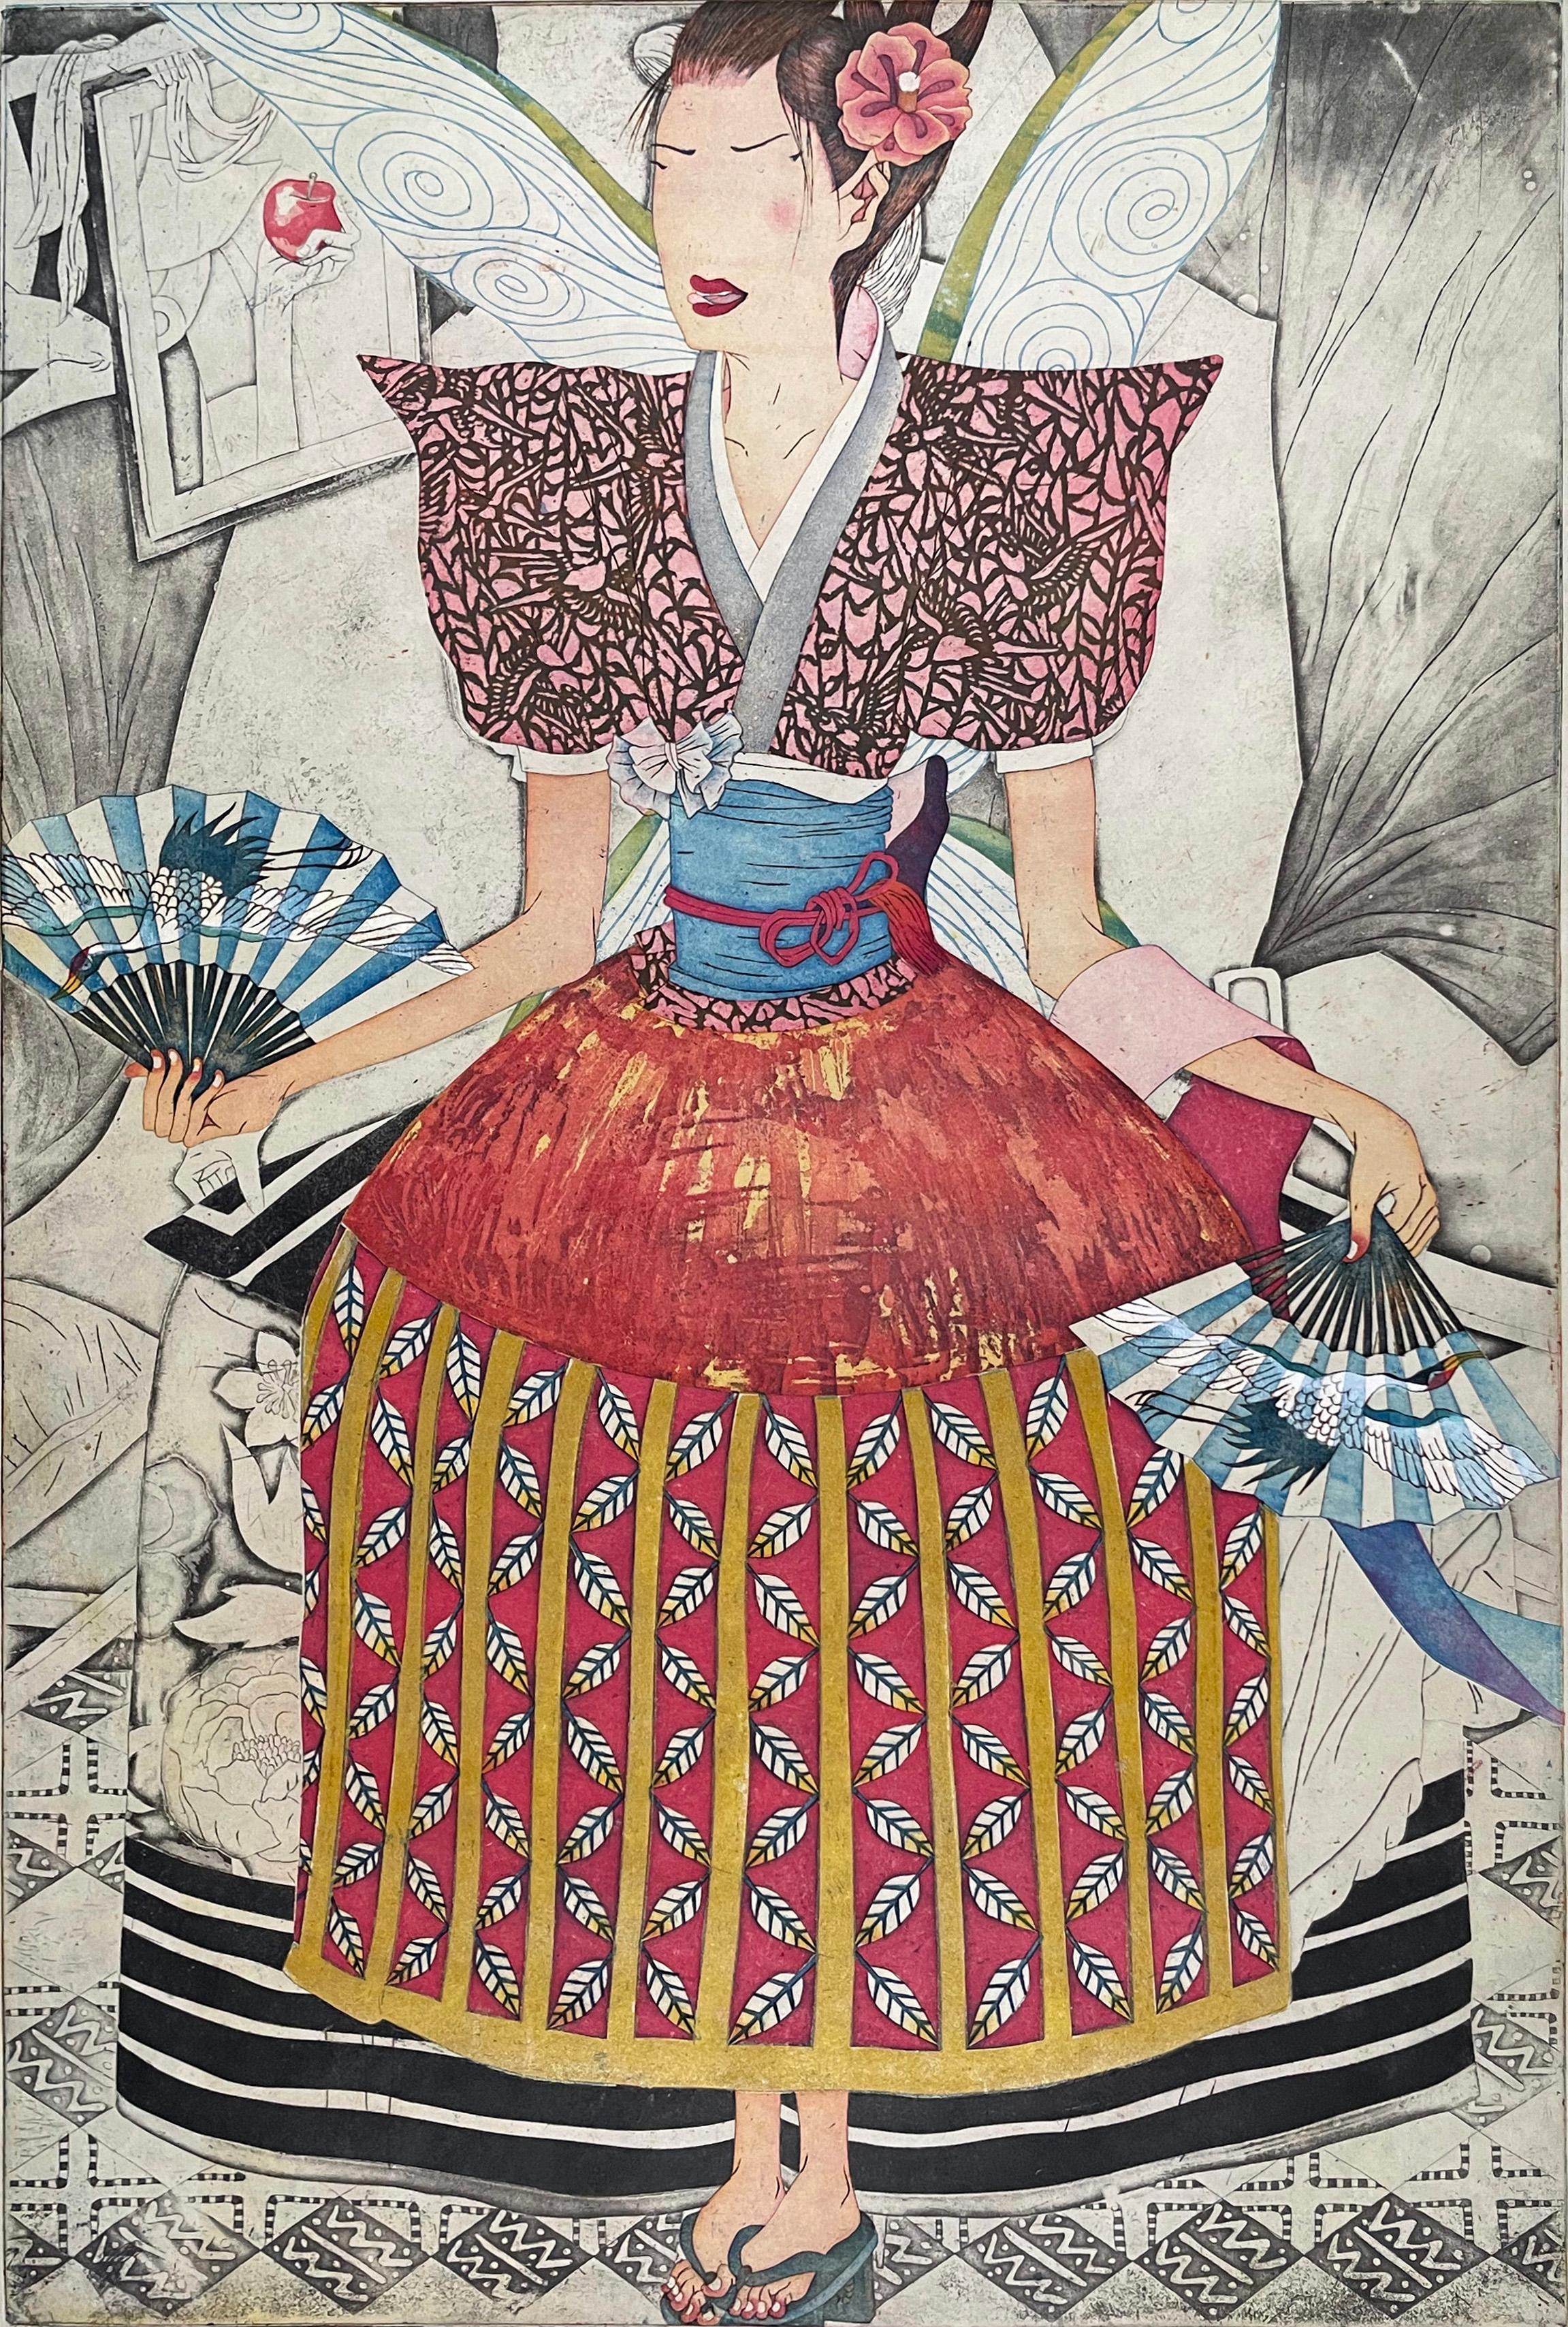 Signed, titled and numbered by the artist. This is #3 of 15.

While the images have some resemblance to traditional Japanese Ukiyo-e prints, their sense of whimsy, satire and irony relate more closely to contemporary life and western sensibilities.